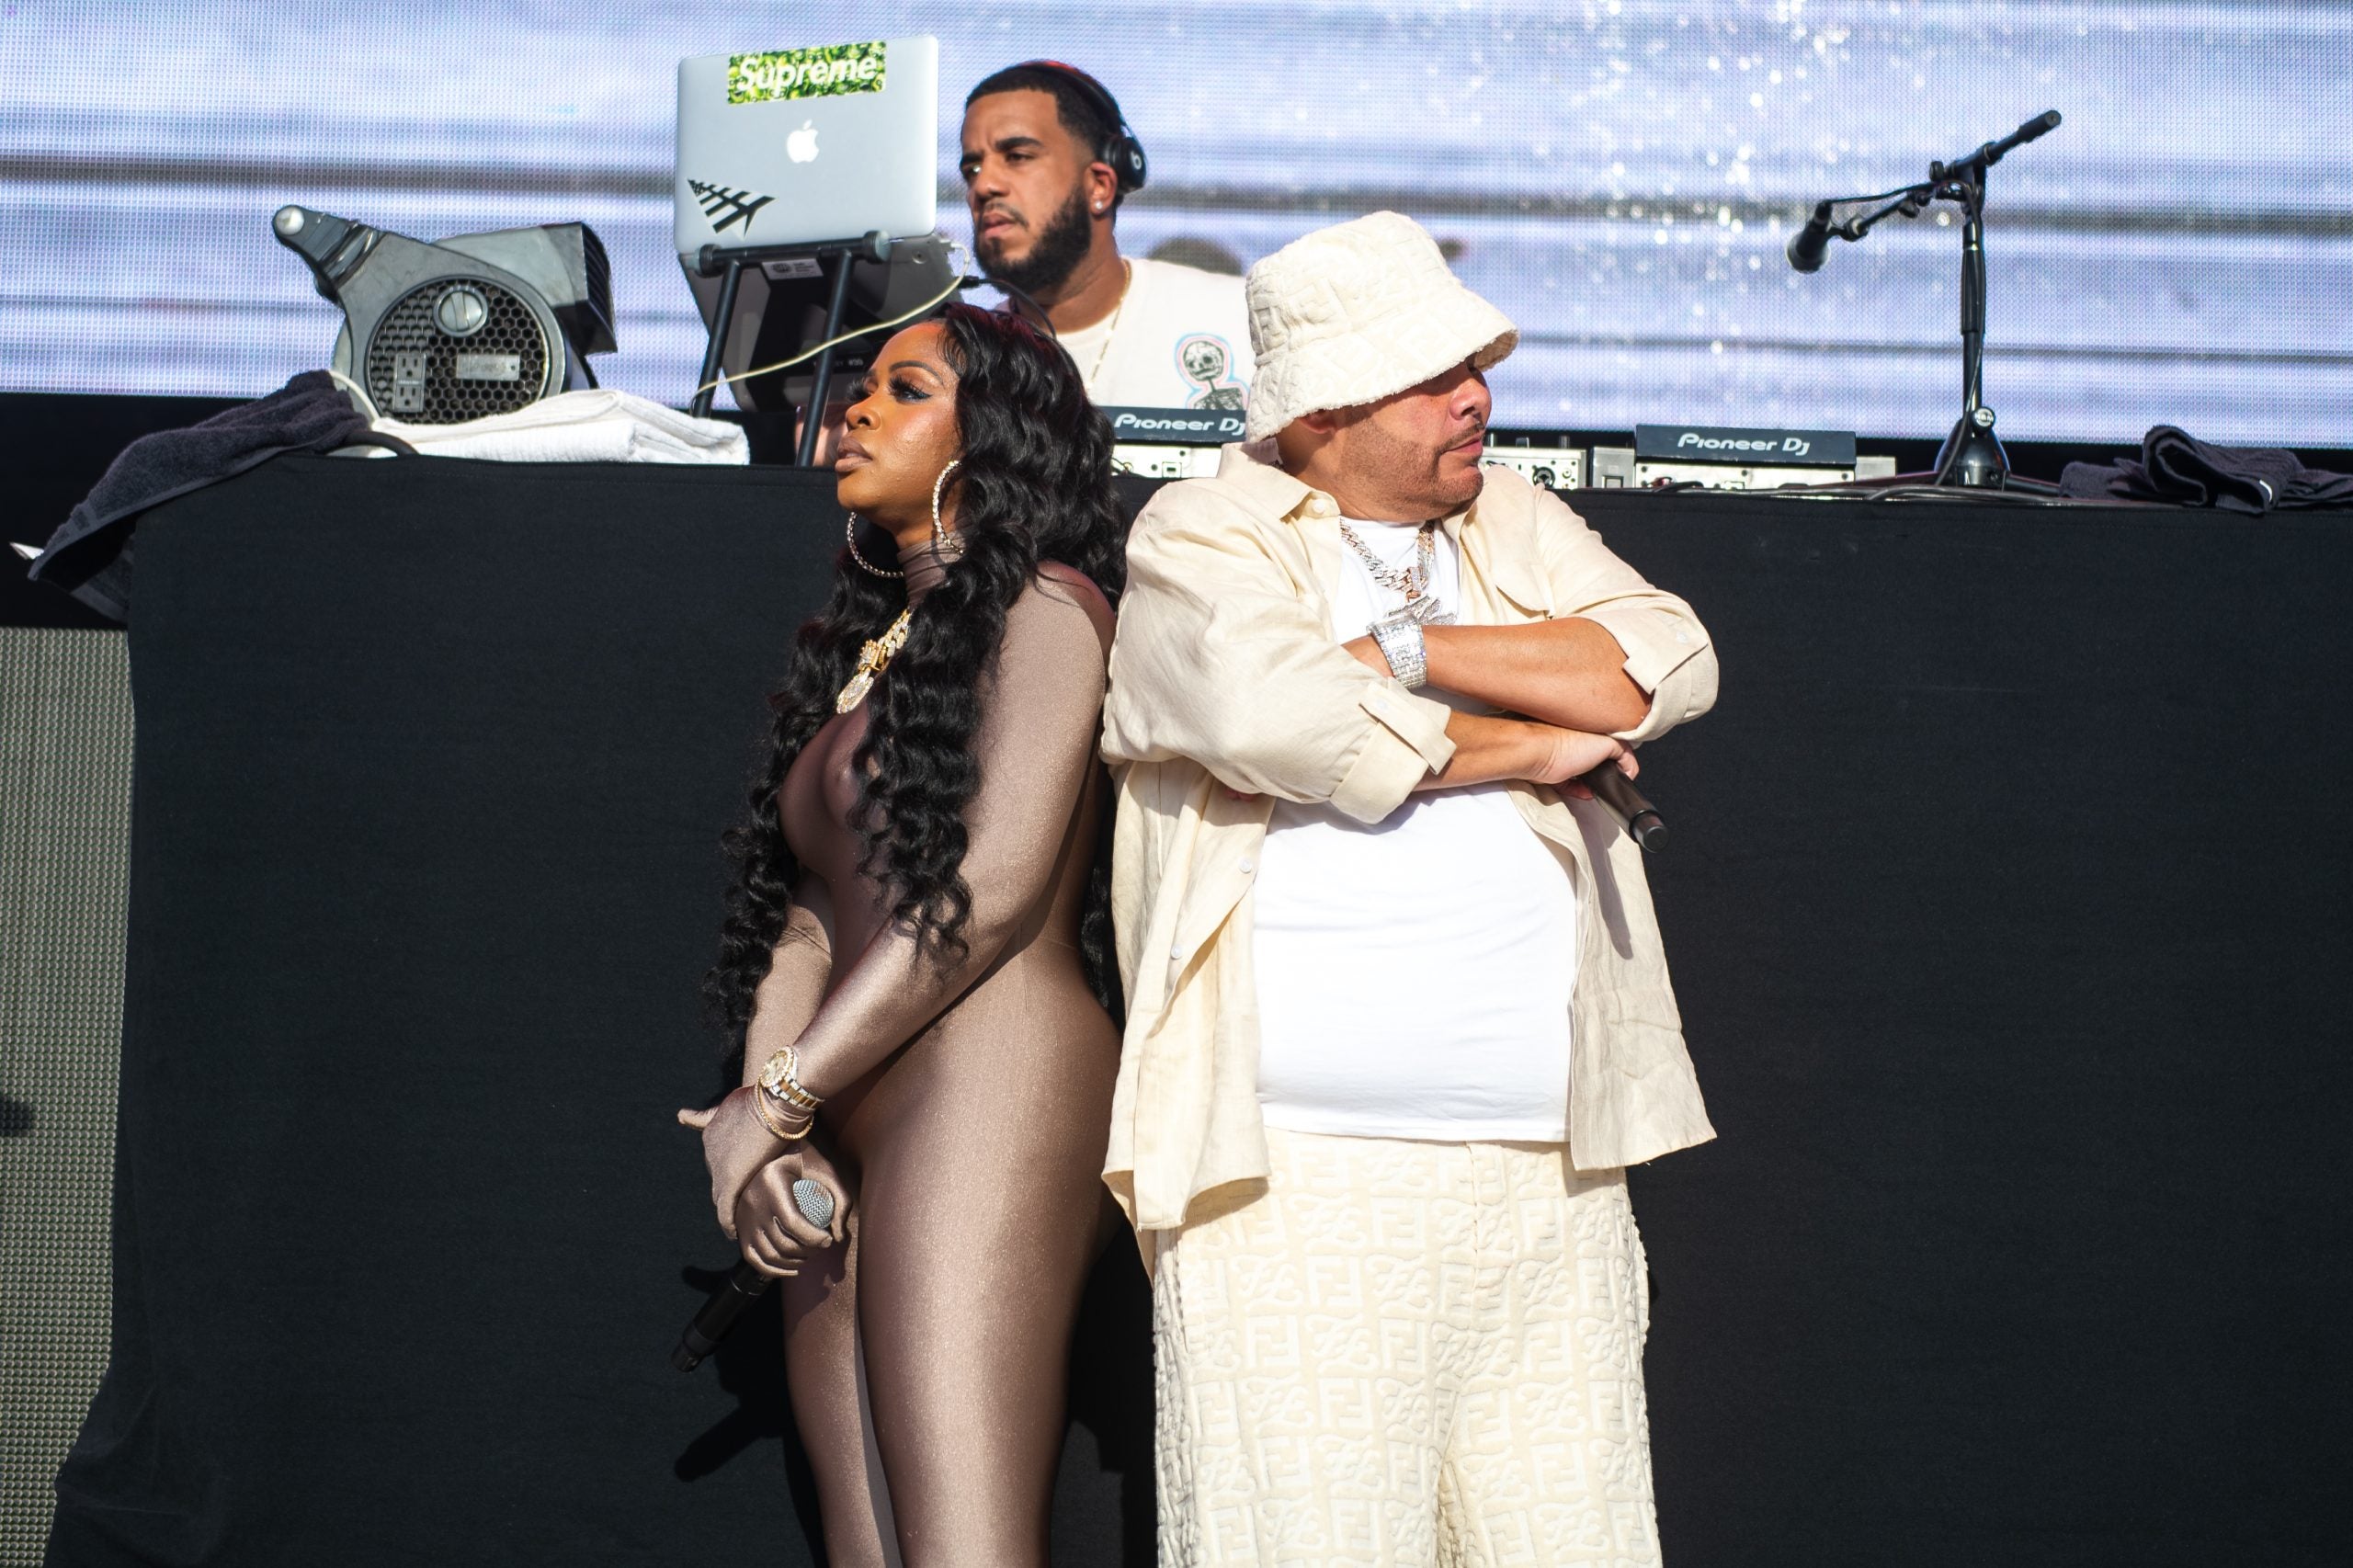 Lil Kim, Remy Ma, Rick Ross, Scarface, N.O.R.E., And More Hip-Hop Legends Take Over Queens For Rock The Bells Festival